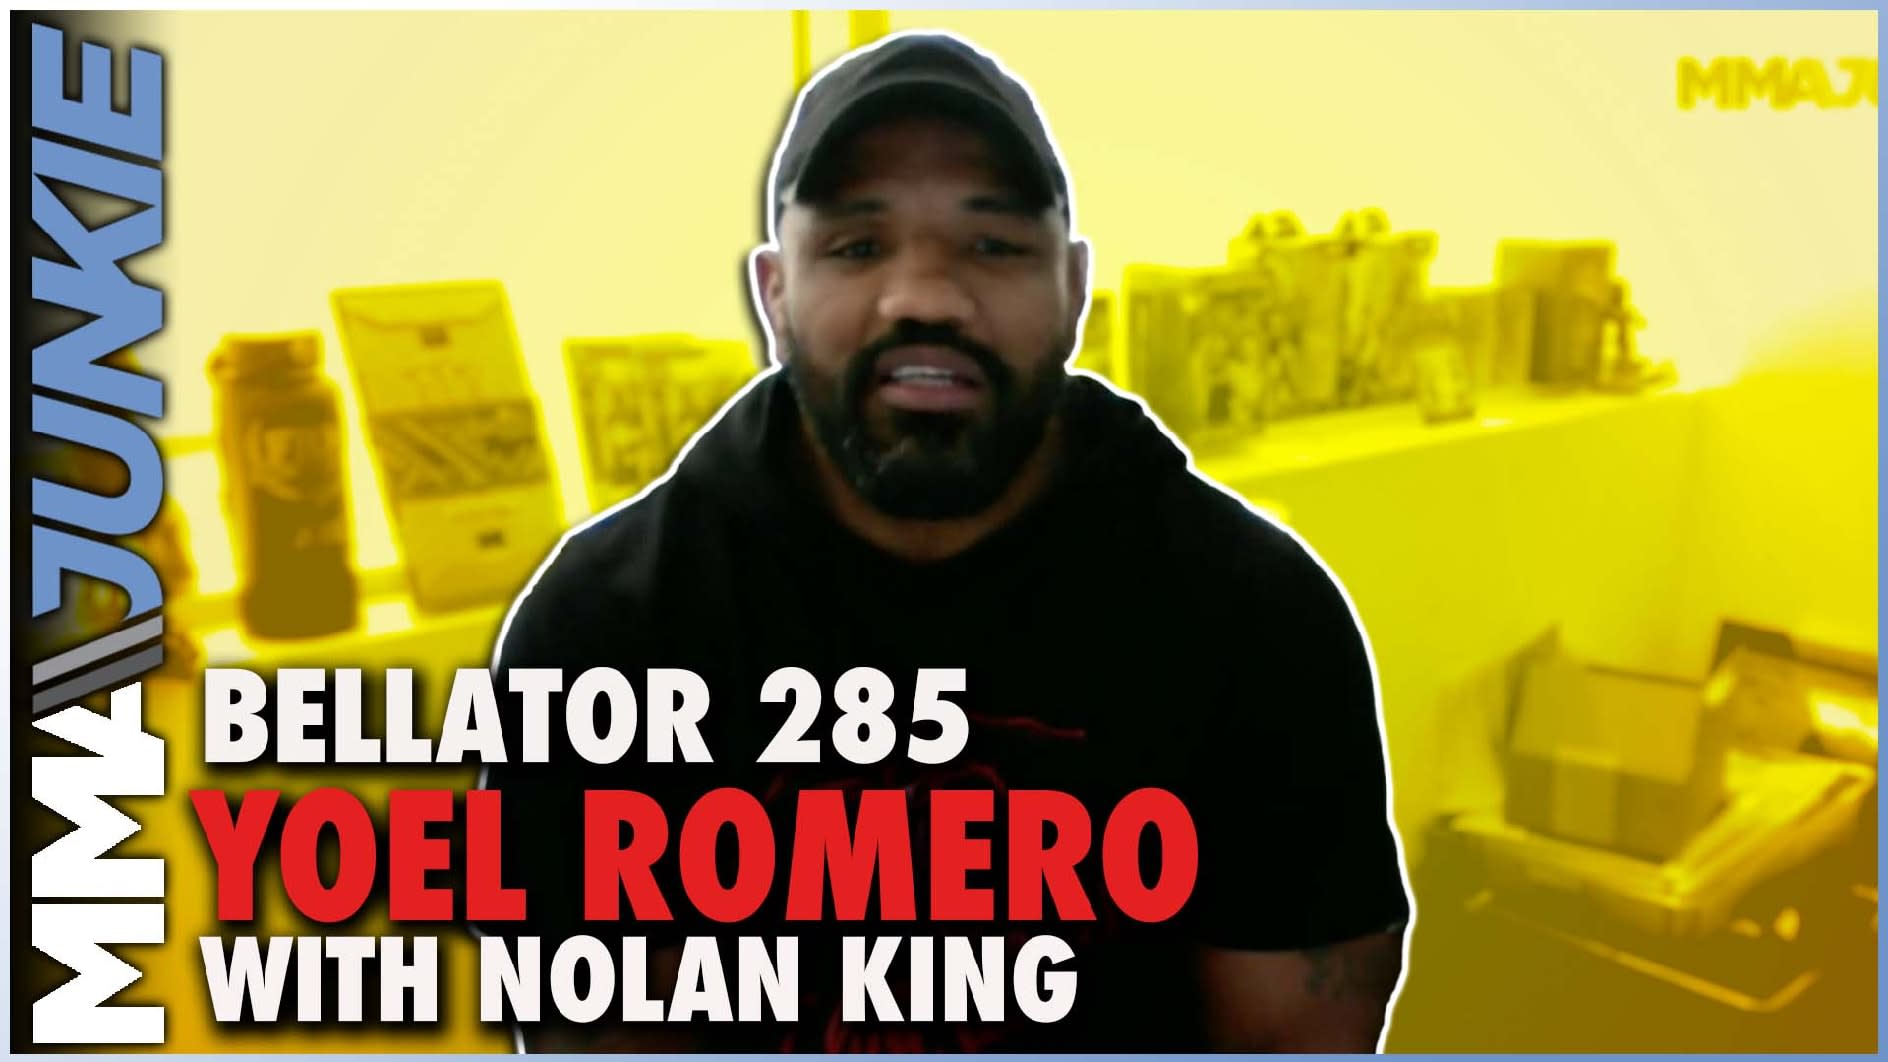 Yoel Romero plans to beat Melvin Manhoef at Bellator 285, then drop to middleweight